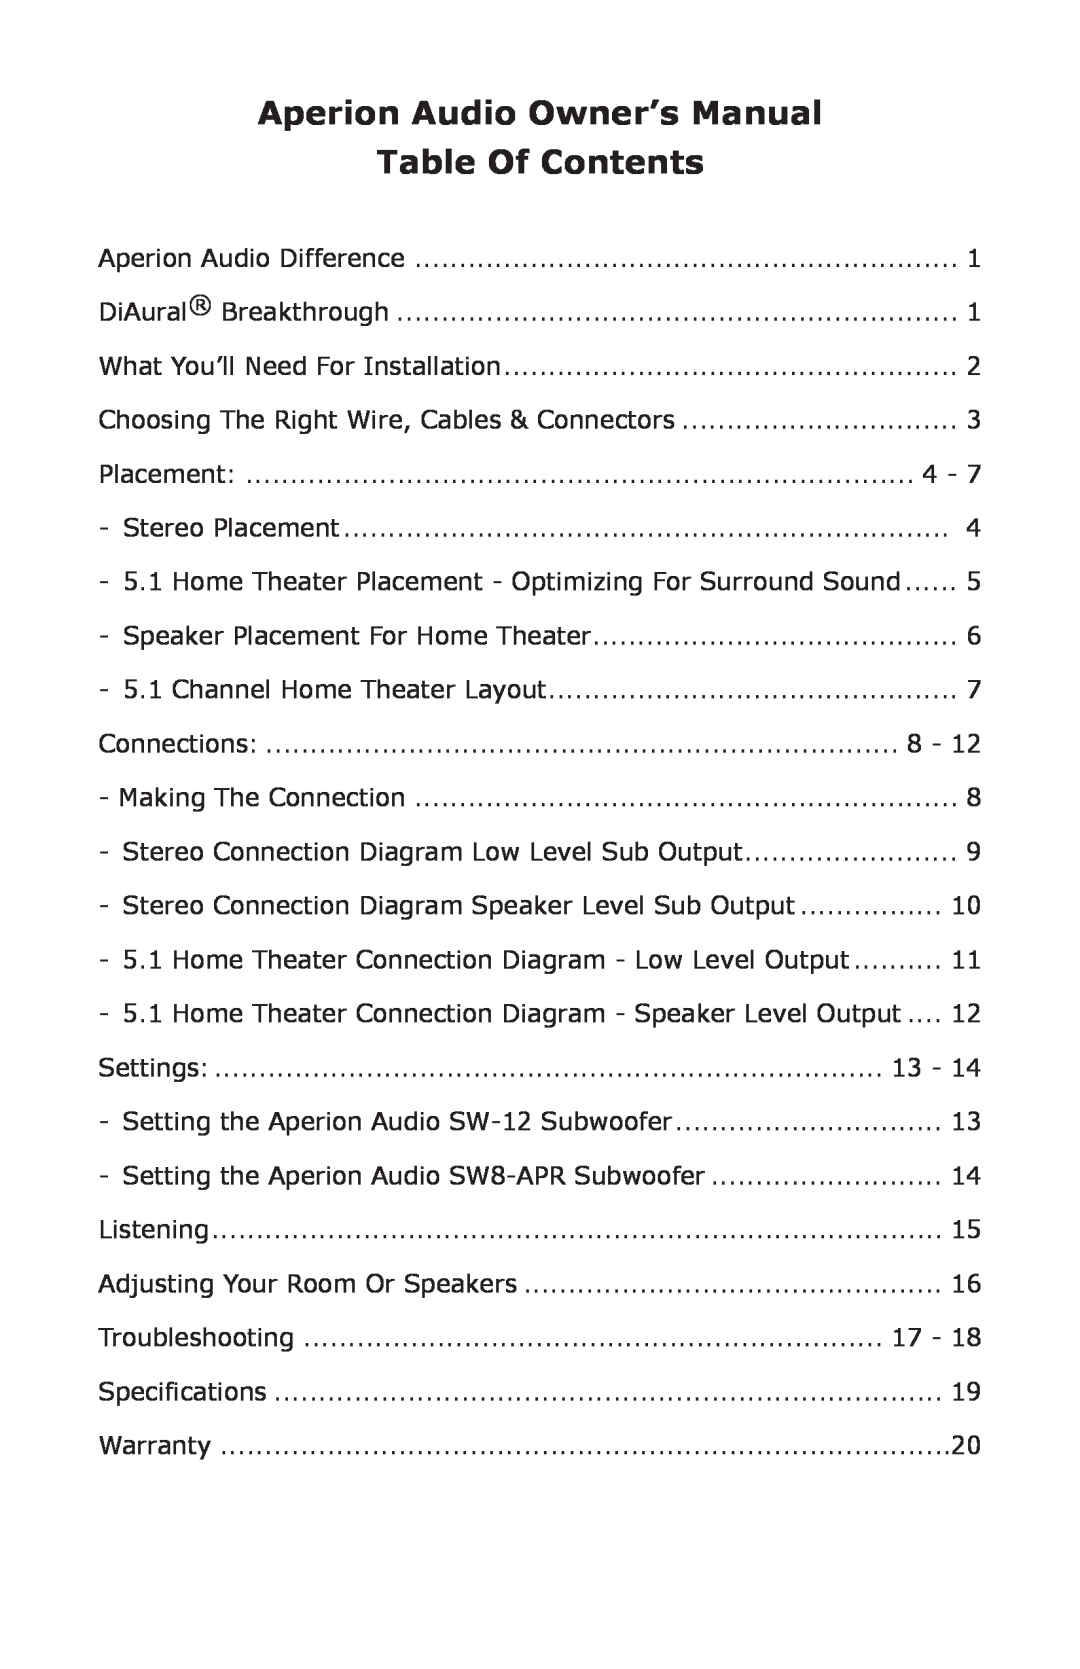 Aperion Audio SW8-APR, SW-12 owner manual Aperion Audio Owner’s Manual, Table Of Contents 